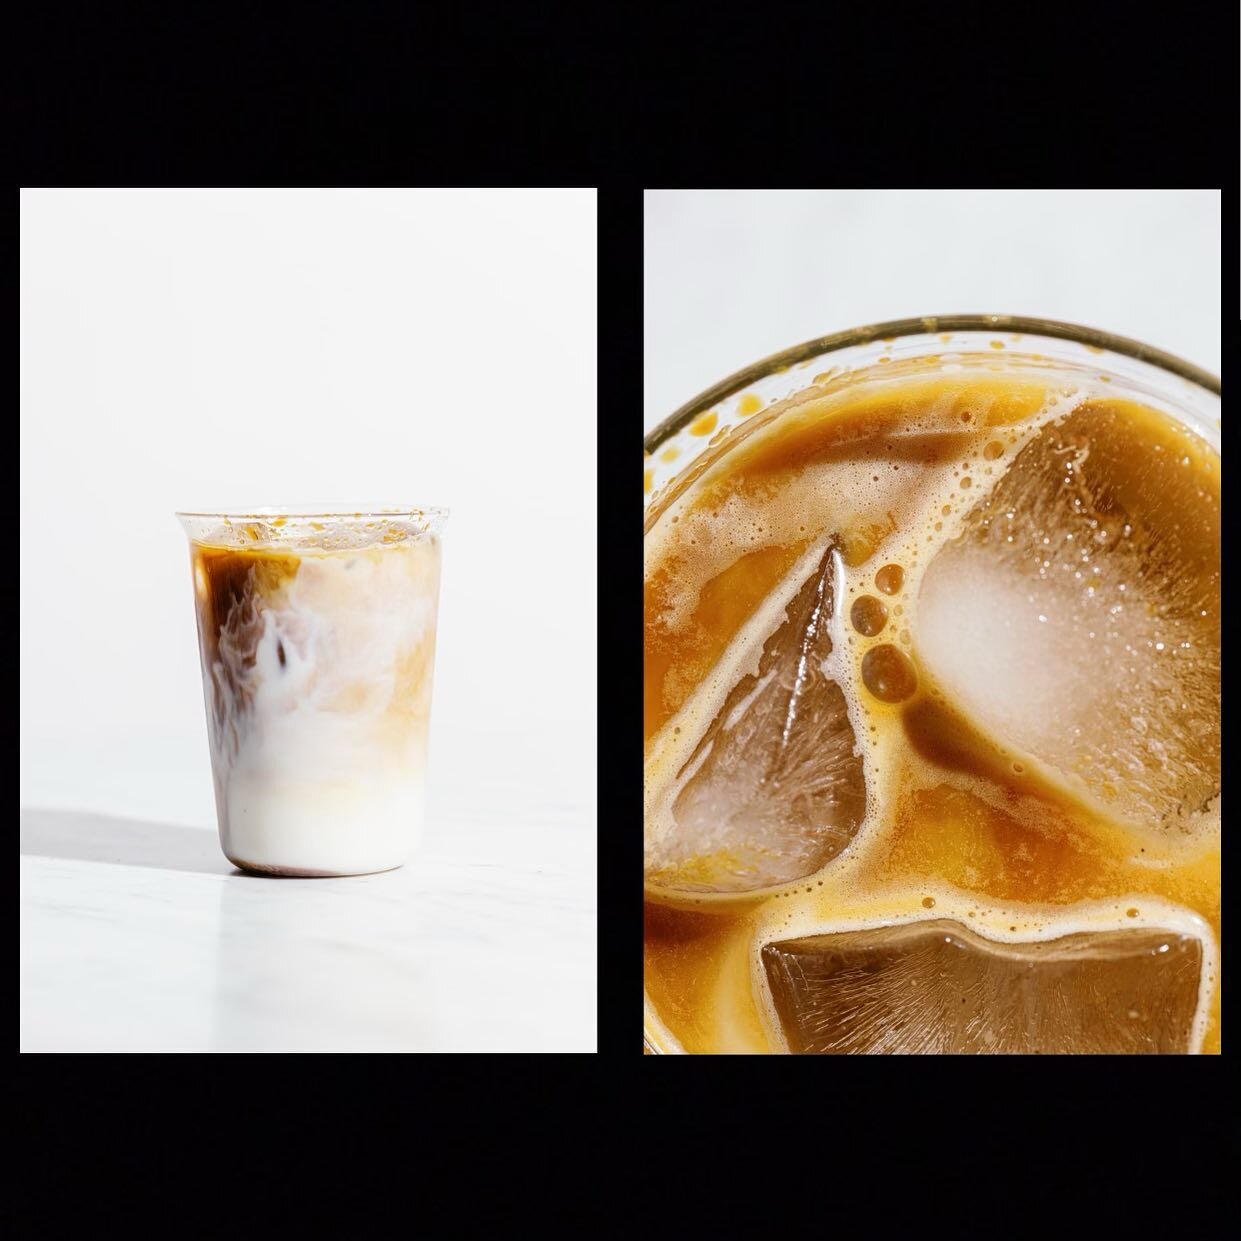 Introducing our iced latte. A classic iced latte made with espresso and your choice of milk.

Nothing beats iced latte on a hot sunny day.